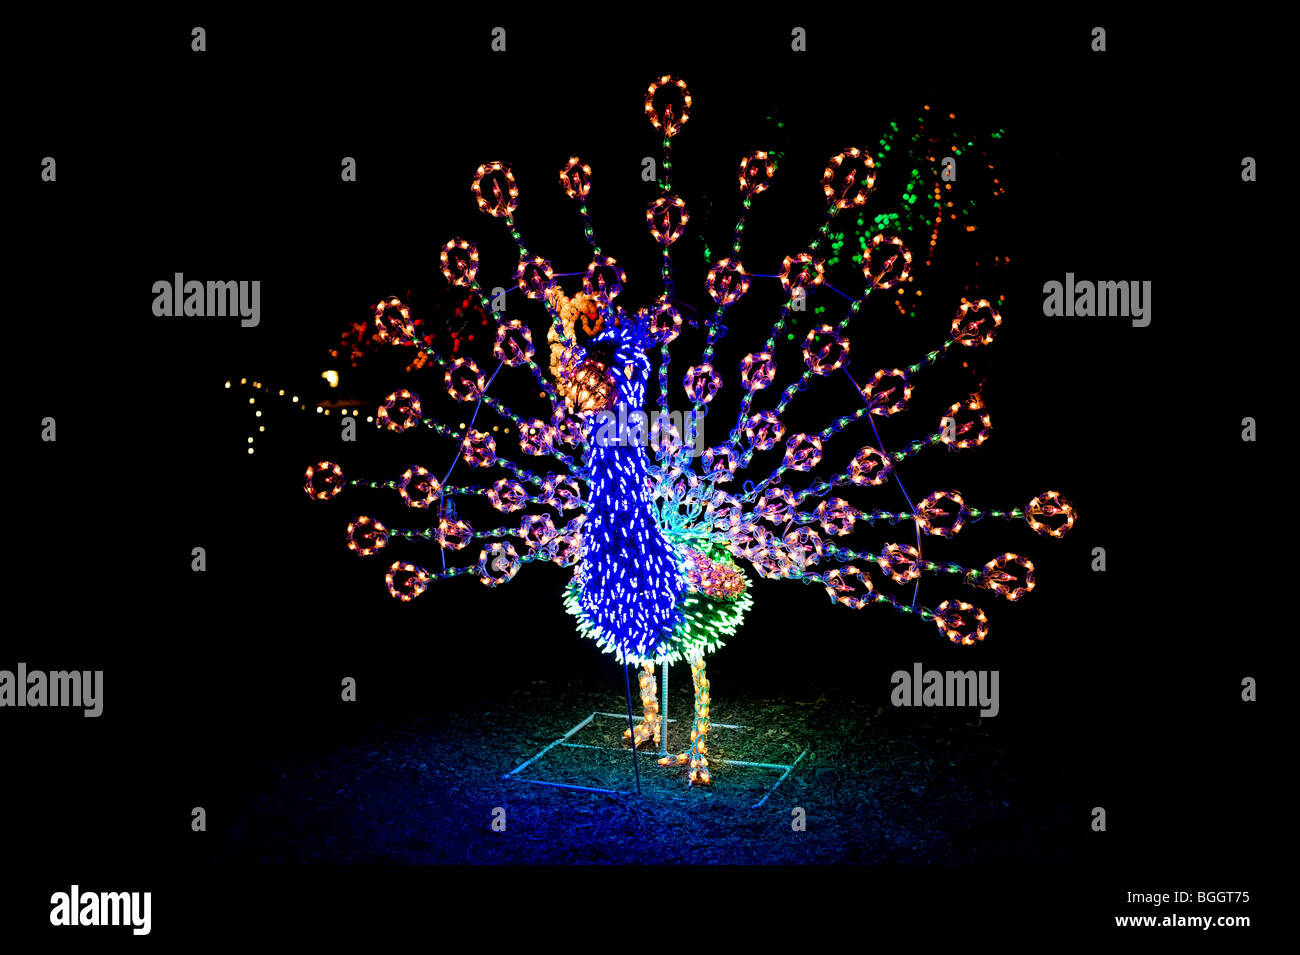 A lighted Christmas peacock shows its vibrant colors and beautiful details throughout the string of lighted bulbs.. Stock Photo